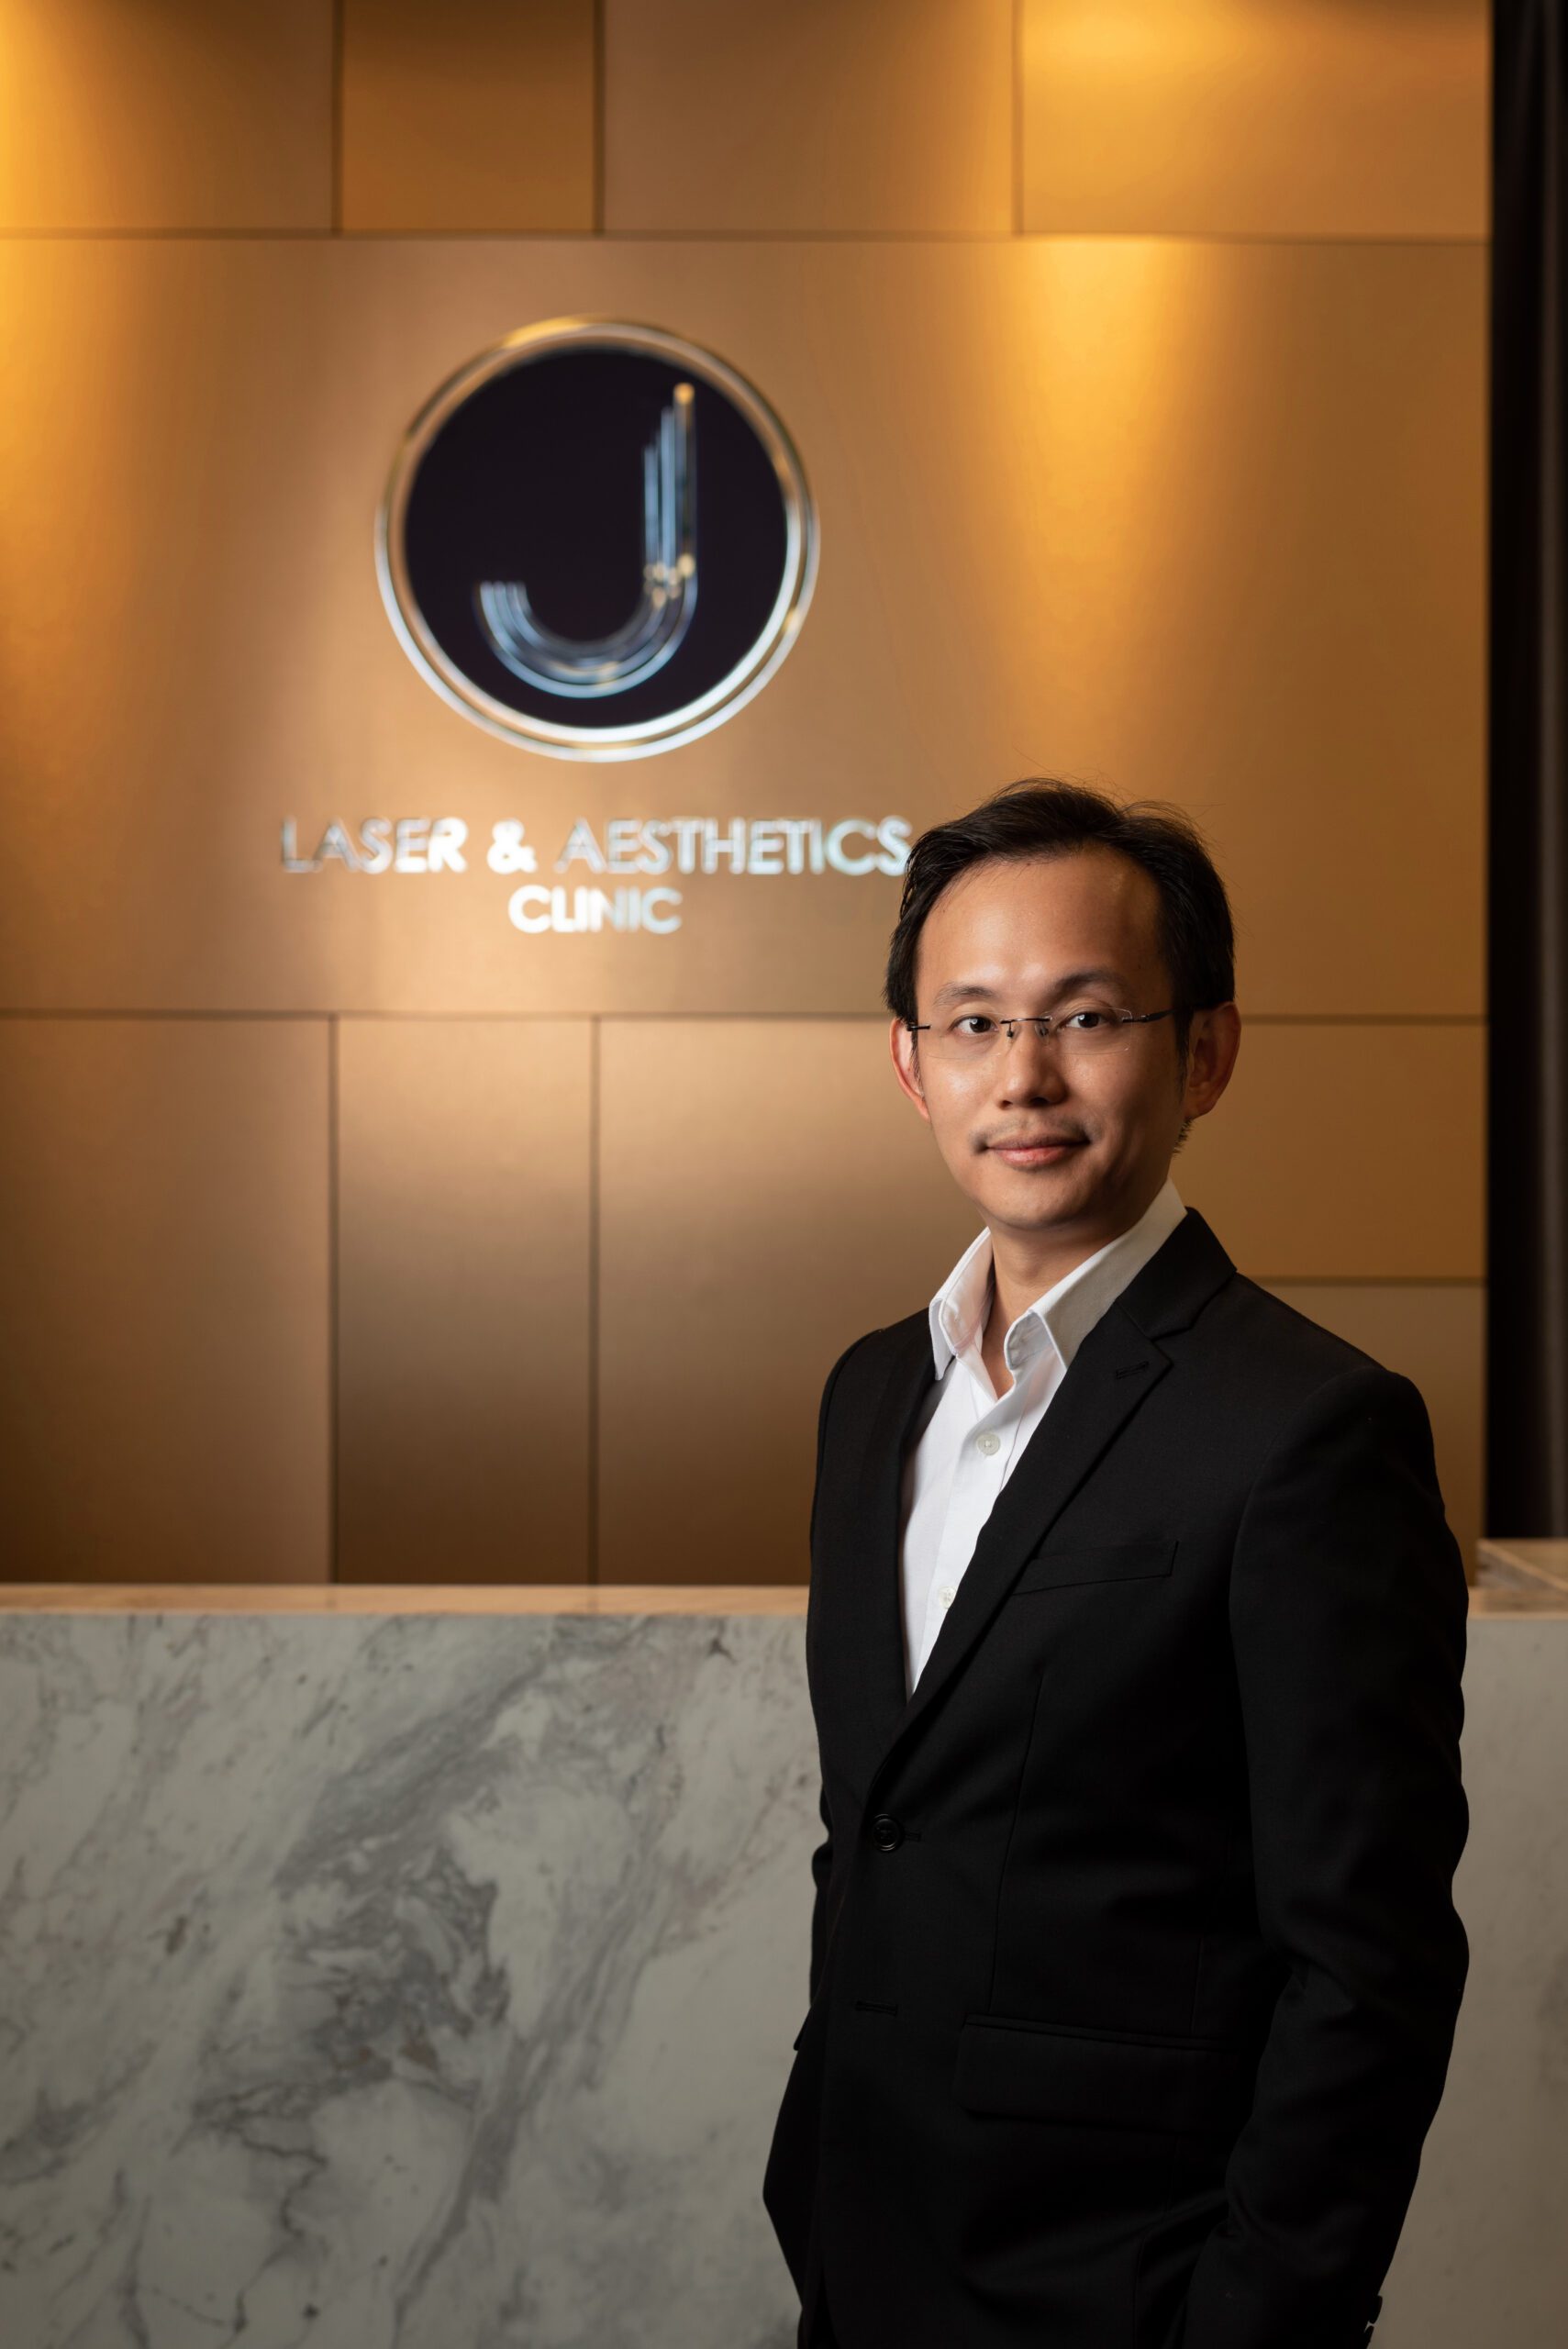 doctor from aesthetic clinic in singapore doctor ngiam juzheng j laser and aesthetics clinic